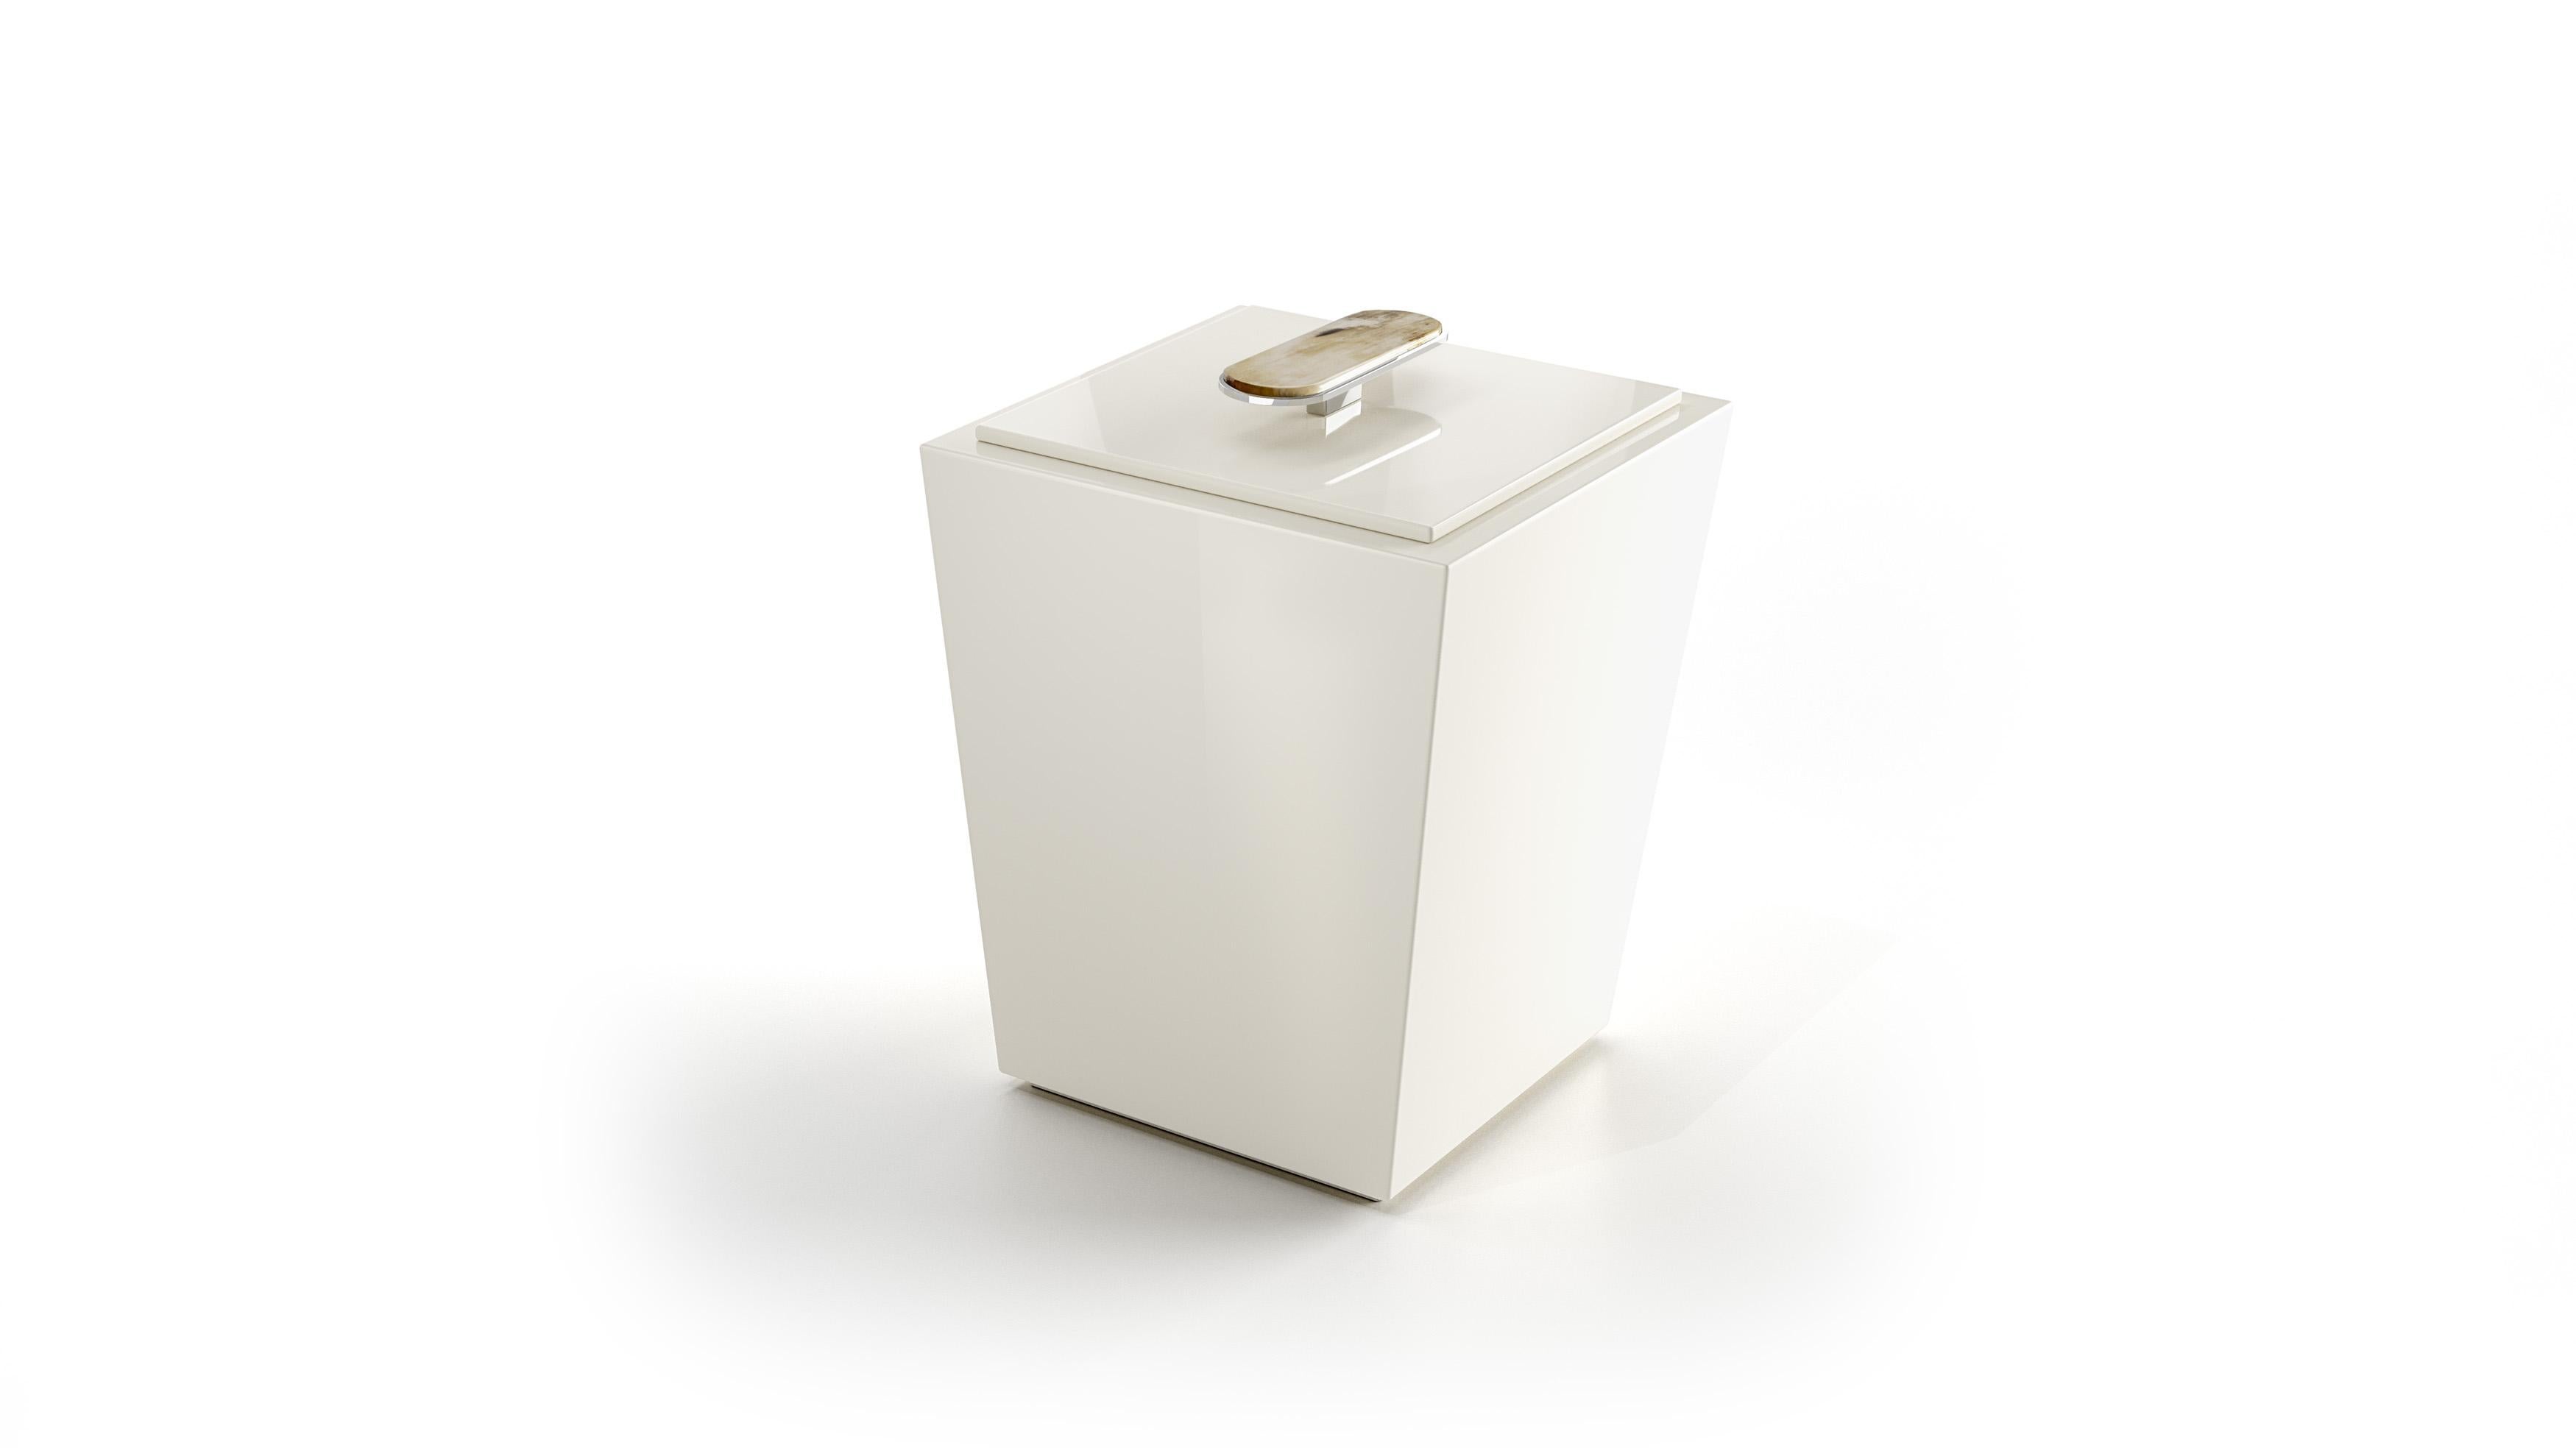 The Bicco waste paper basket is a versatile and elegant decor piece, that will easily complement both bathroom and office spaces. Fashioned from glossy ivory lacquered wood, this bin boasts a practical lid adorned with a refined detail in Corno